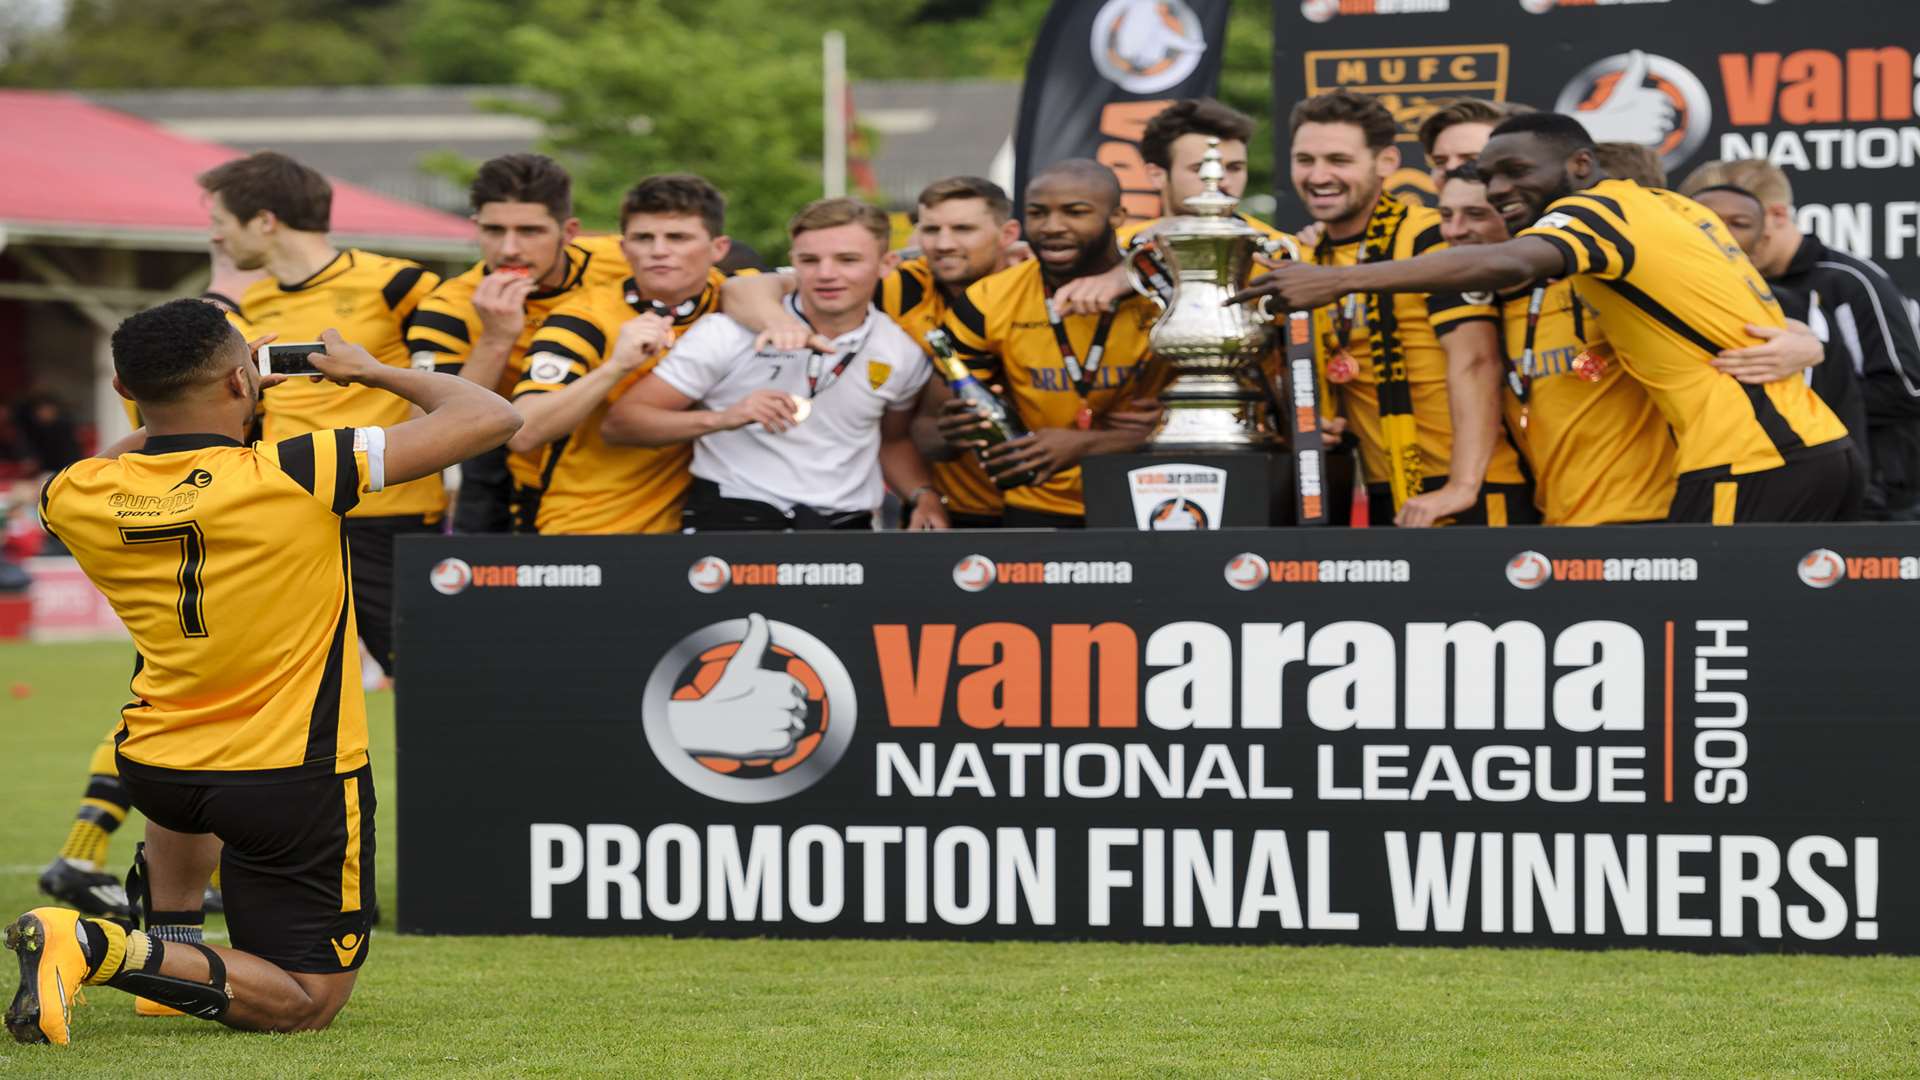 Stones players get ready to lift the trophy. Picture: Andy Payton